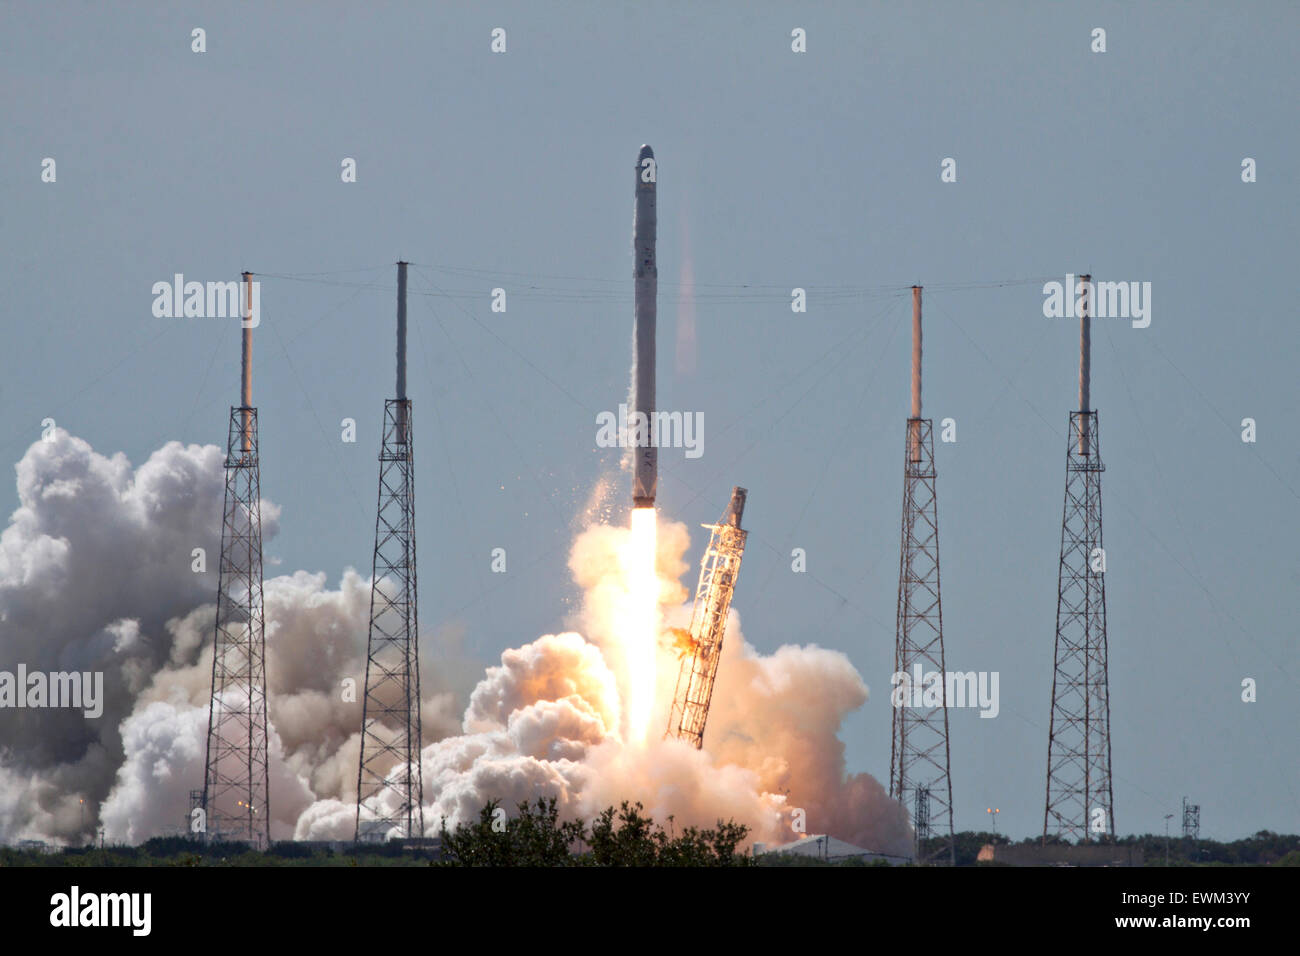 Cape Canaveral, Florida, USA. 28th June, 2015. The SpaceX Falcon 9 commercial rocket blasts off carrying the Dragon capsule on a resupply mission to the International Space Station from Space Launch Complex 40 June 28, 2015 in Cape Canaveral, Florida. The spacecraft suffered a catastrophic failure and broke apart shortly after liftoff, the third cargo mission to fail in eight months. Credit:  Planetpix/Alamy Live News Stock Photo